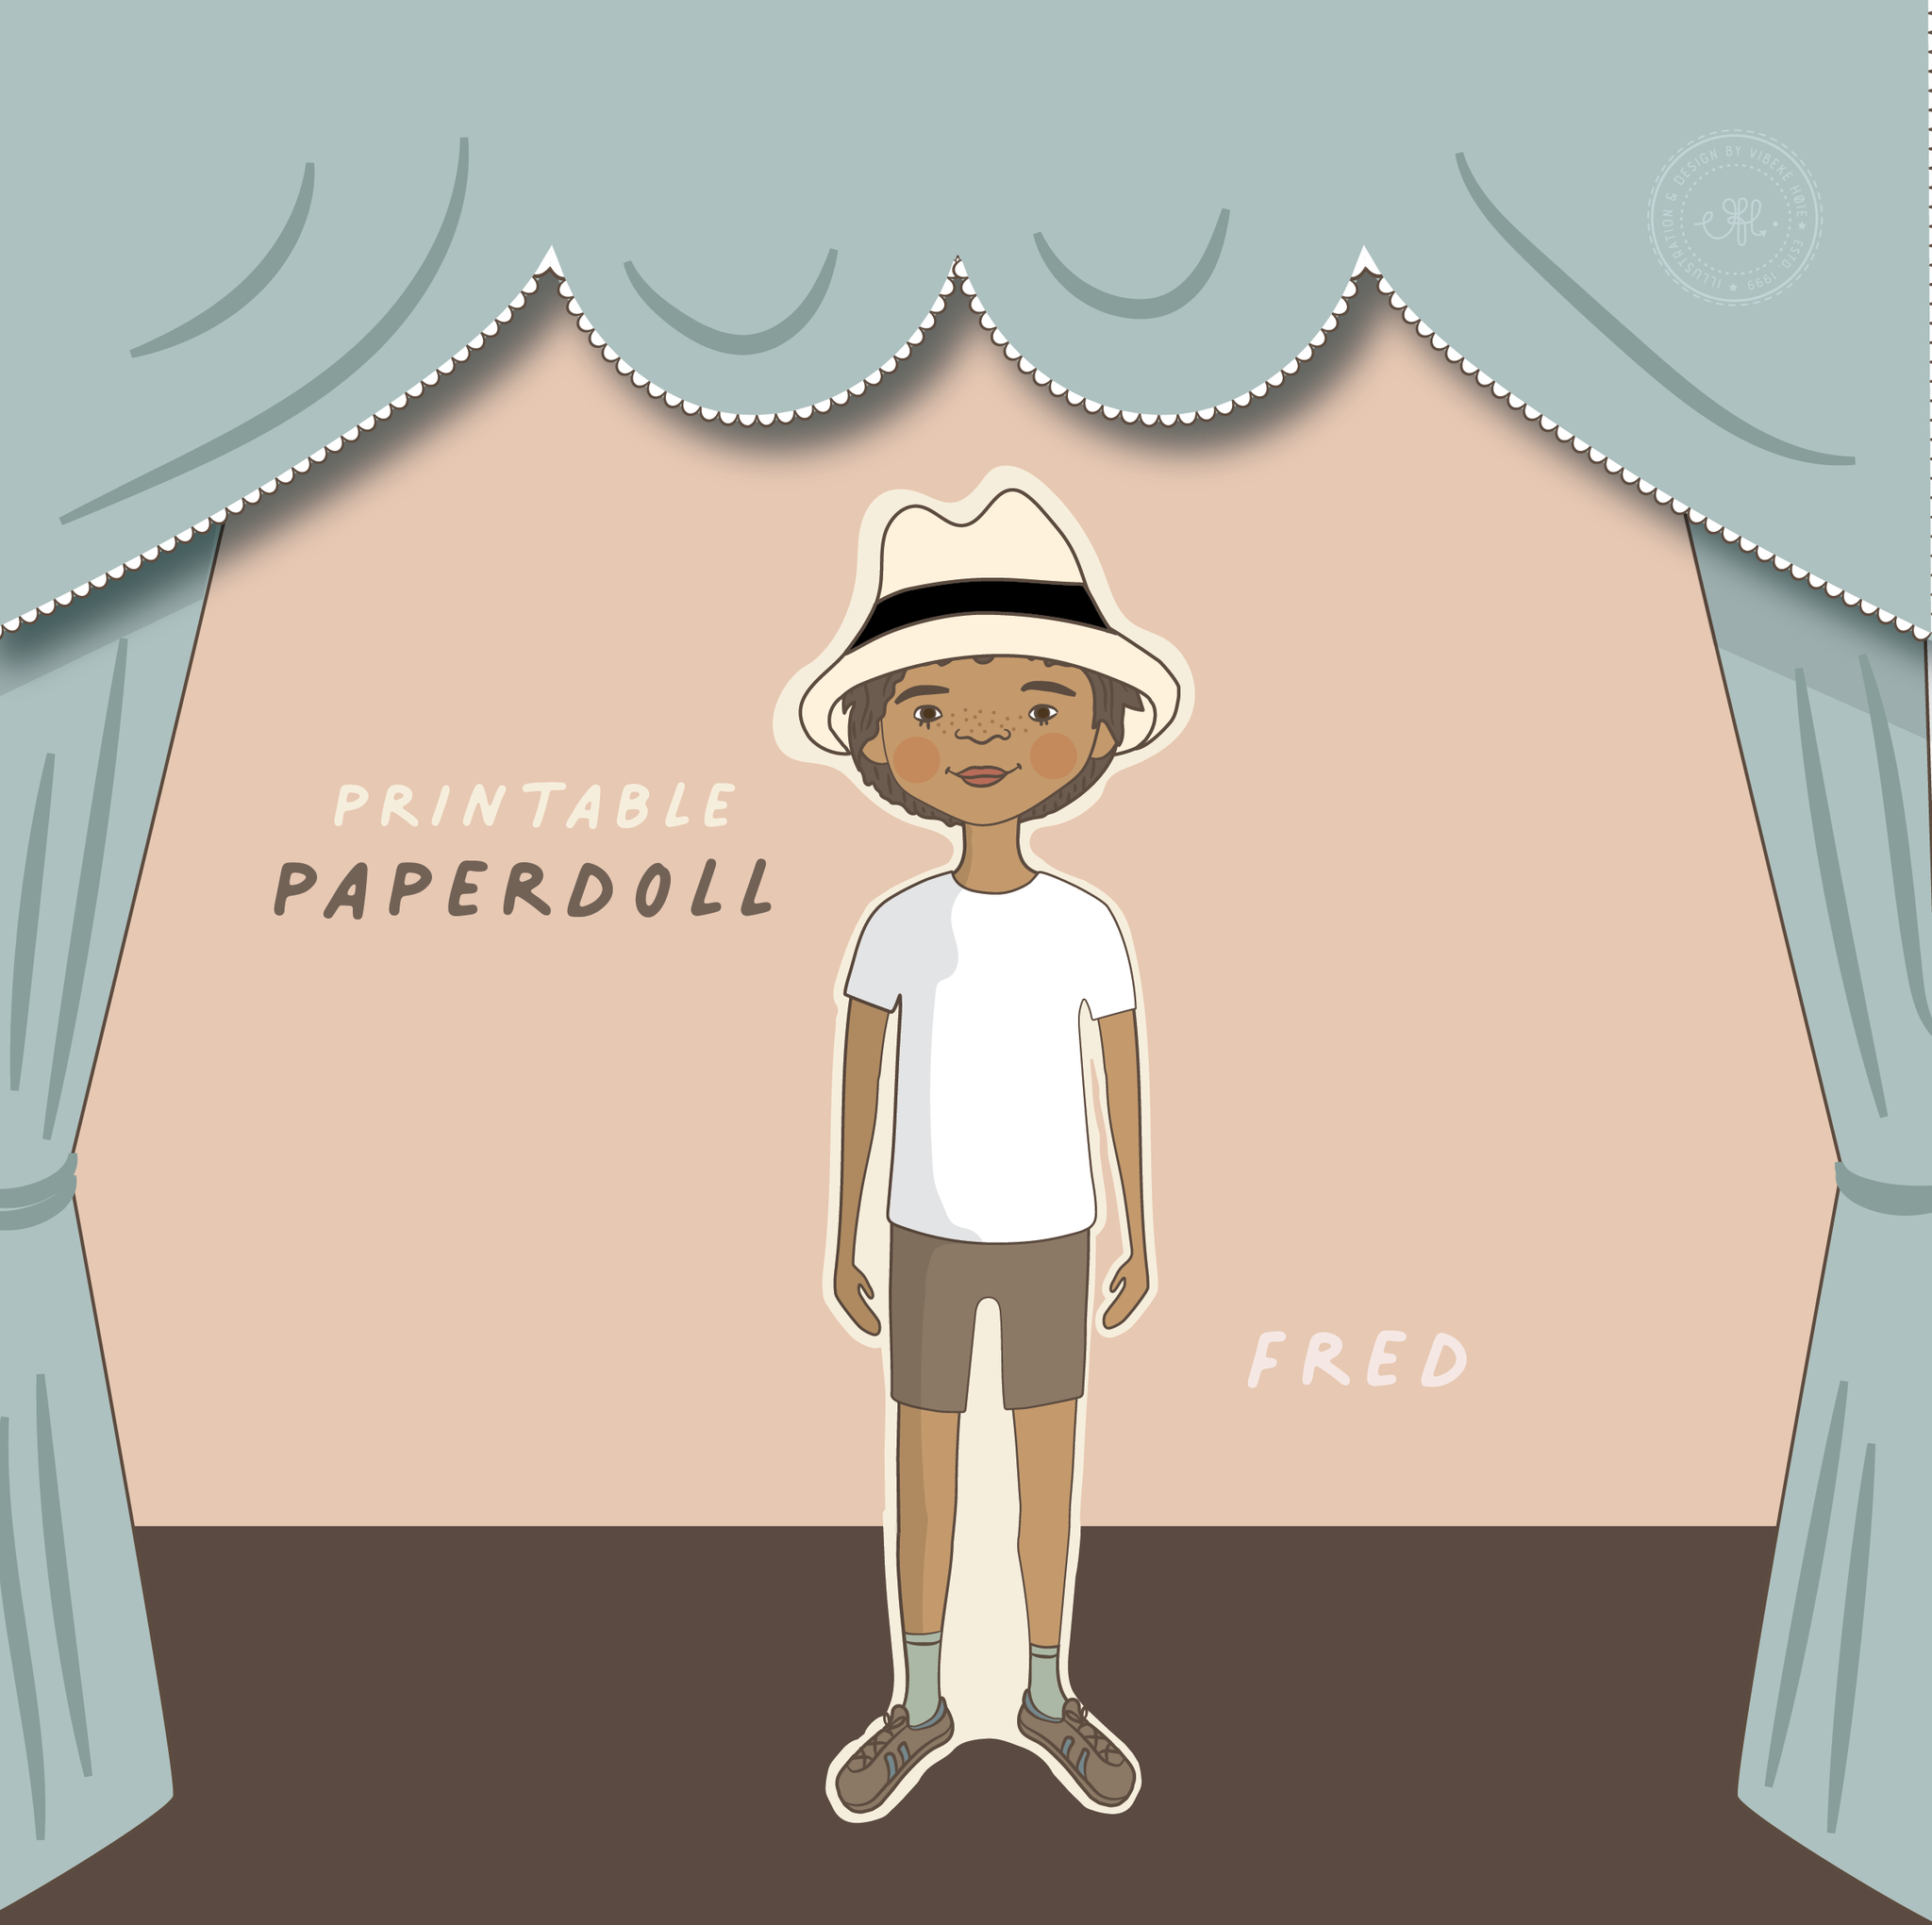 Paperdoll - Fred